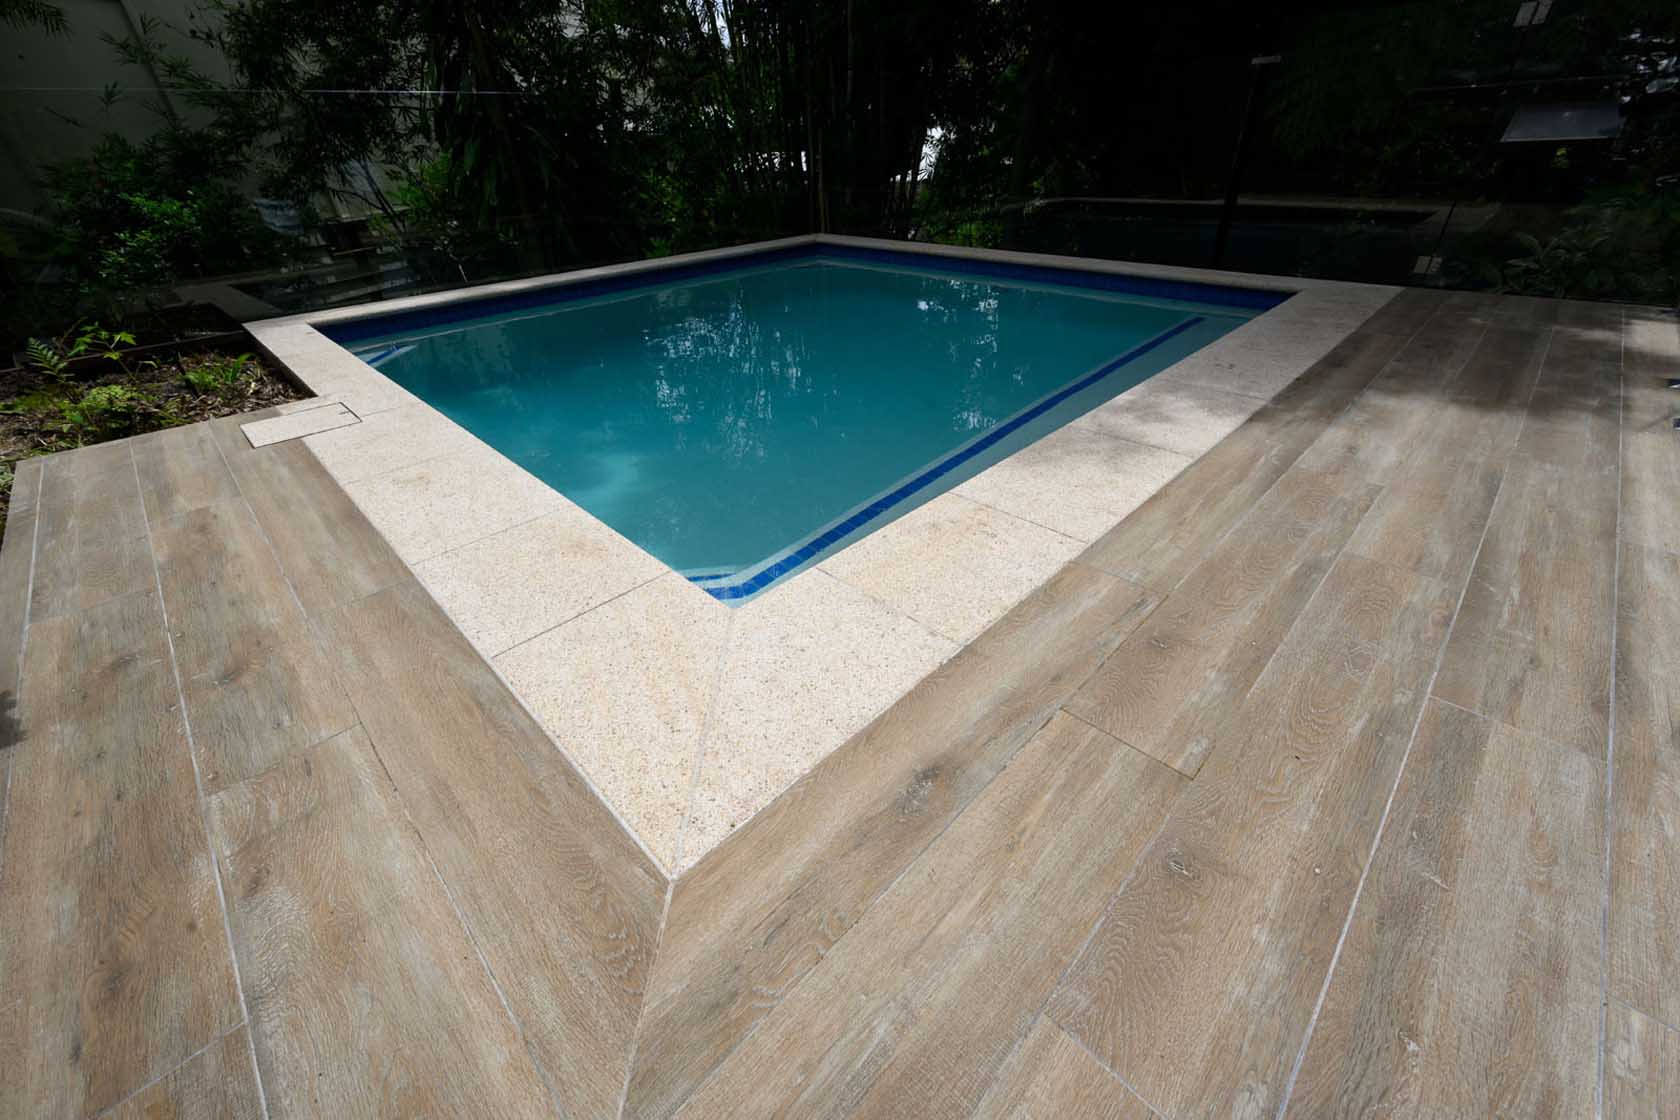 Pool with CM148 Pacific Blue waterline tiles, Almond Granite coping and  Oak Tiledeck paving tiles